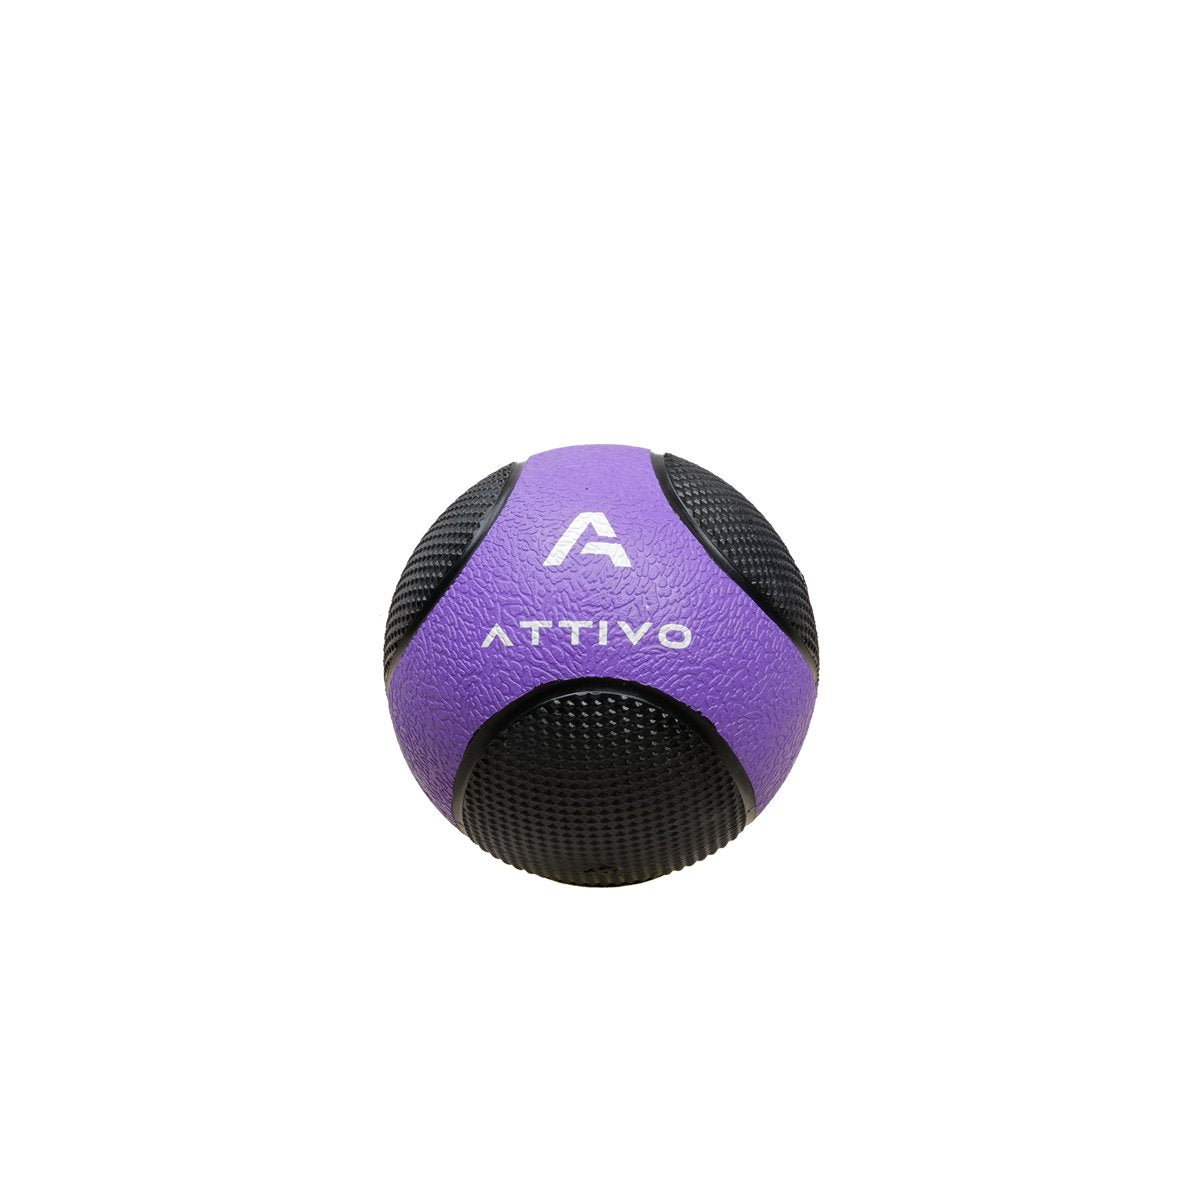 ATTIVO Medicine Ball for Workouts Exercise Balance Training - 2KG